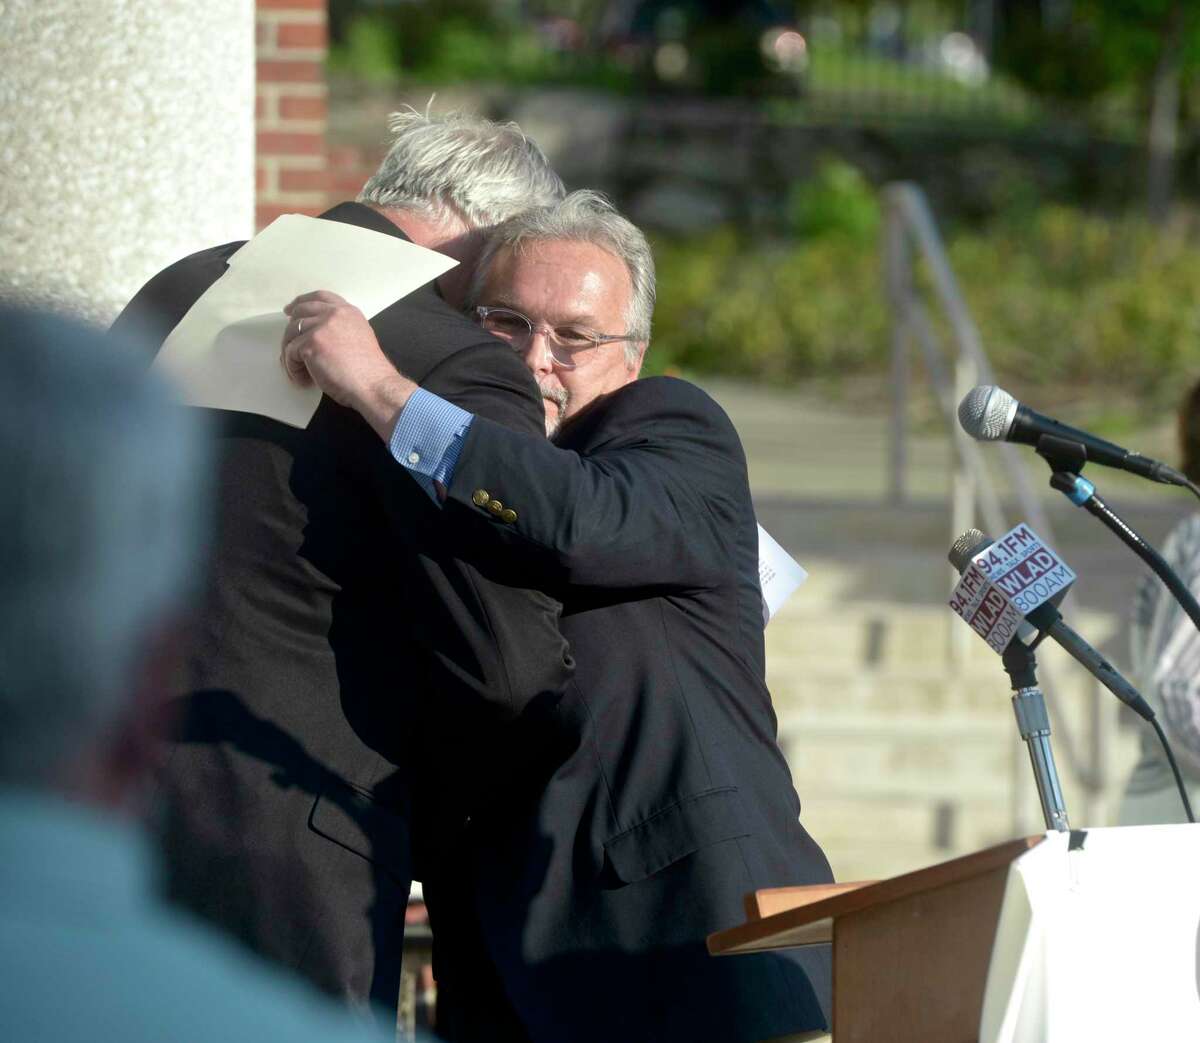 After announcing he would not be running for mayor in the next election, Mayor Joseph Cavo gets a hug from Dean Esposito who he endorsed for the office of mayor. At City Hall on Tuesday evening. May 18, 2021, in Danbury, Conn. Esposito will be sworn in on Tuesday evening. His term officially begins at noon on Wednesday.